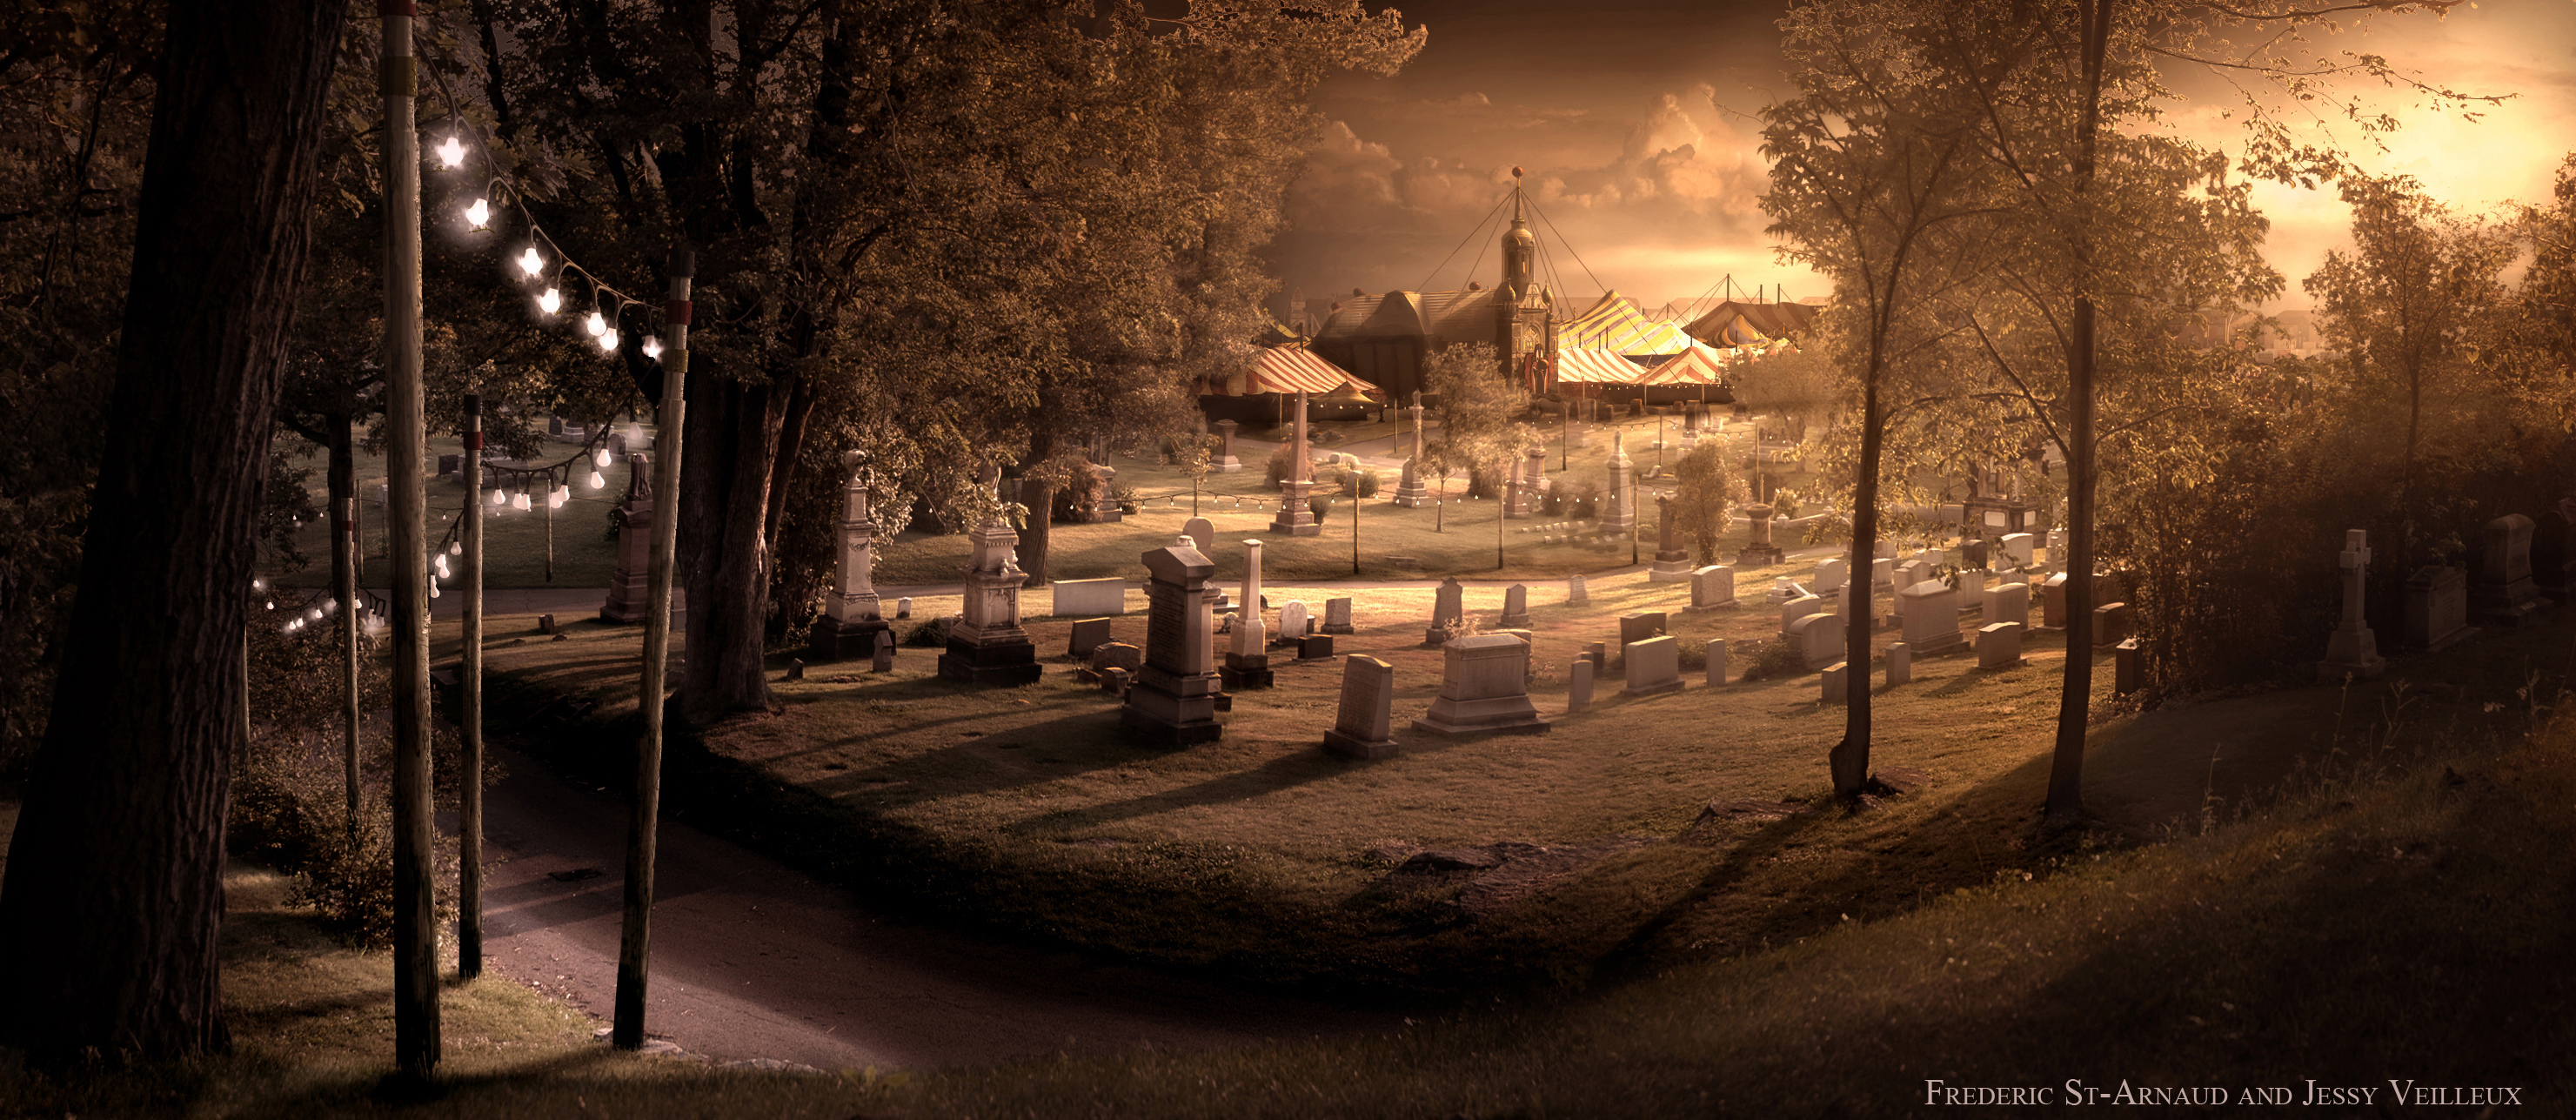 49 Graveyard HD Wallpapers | Background